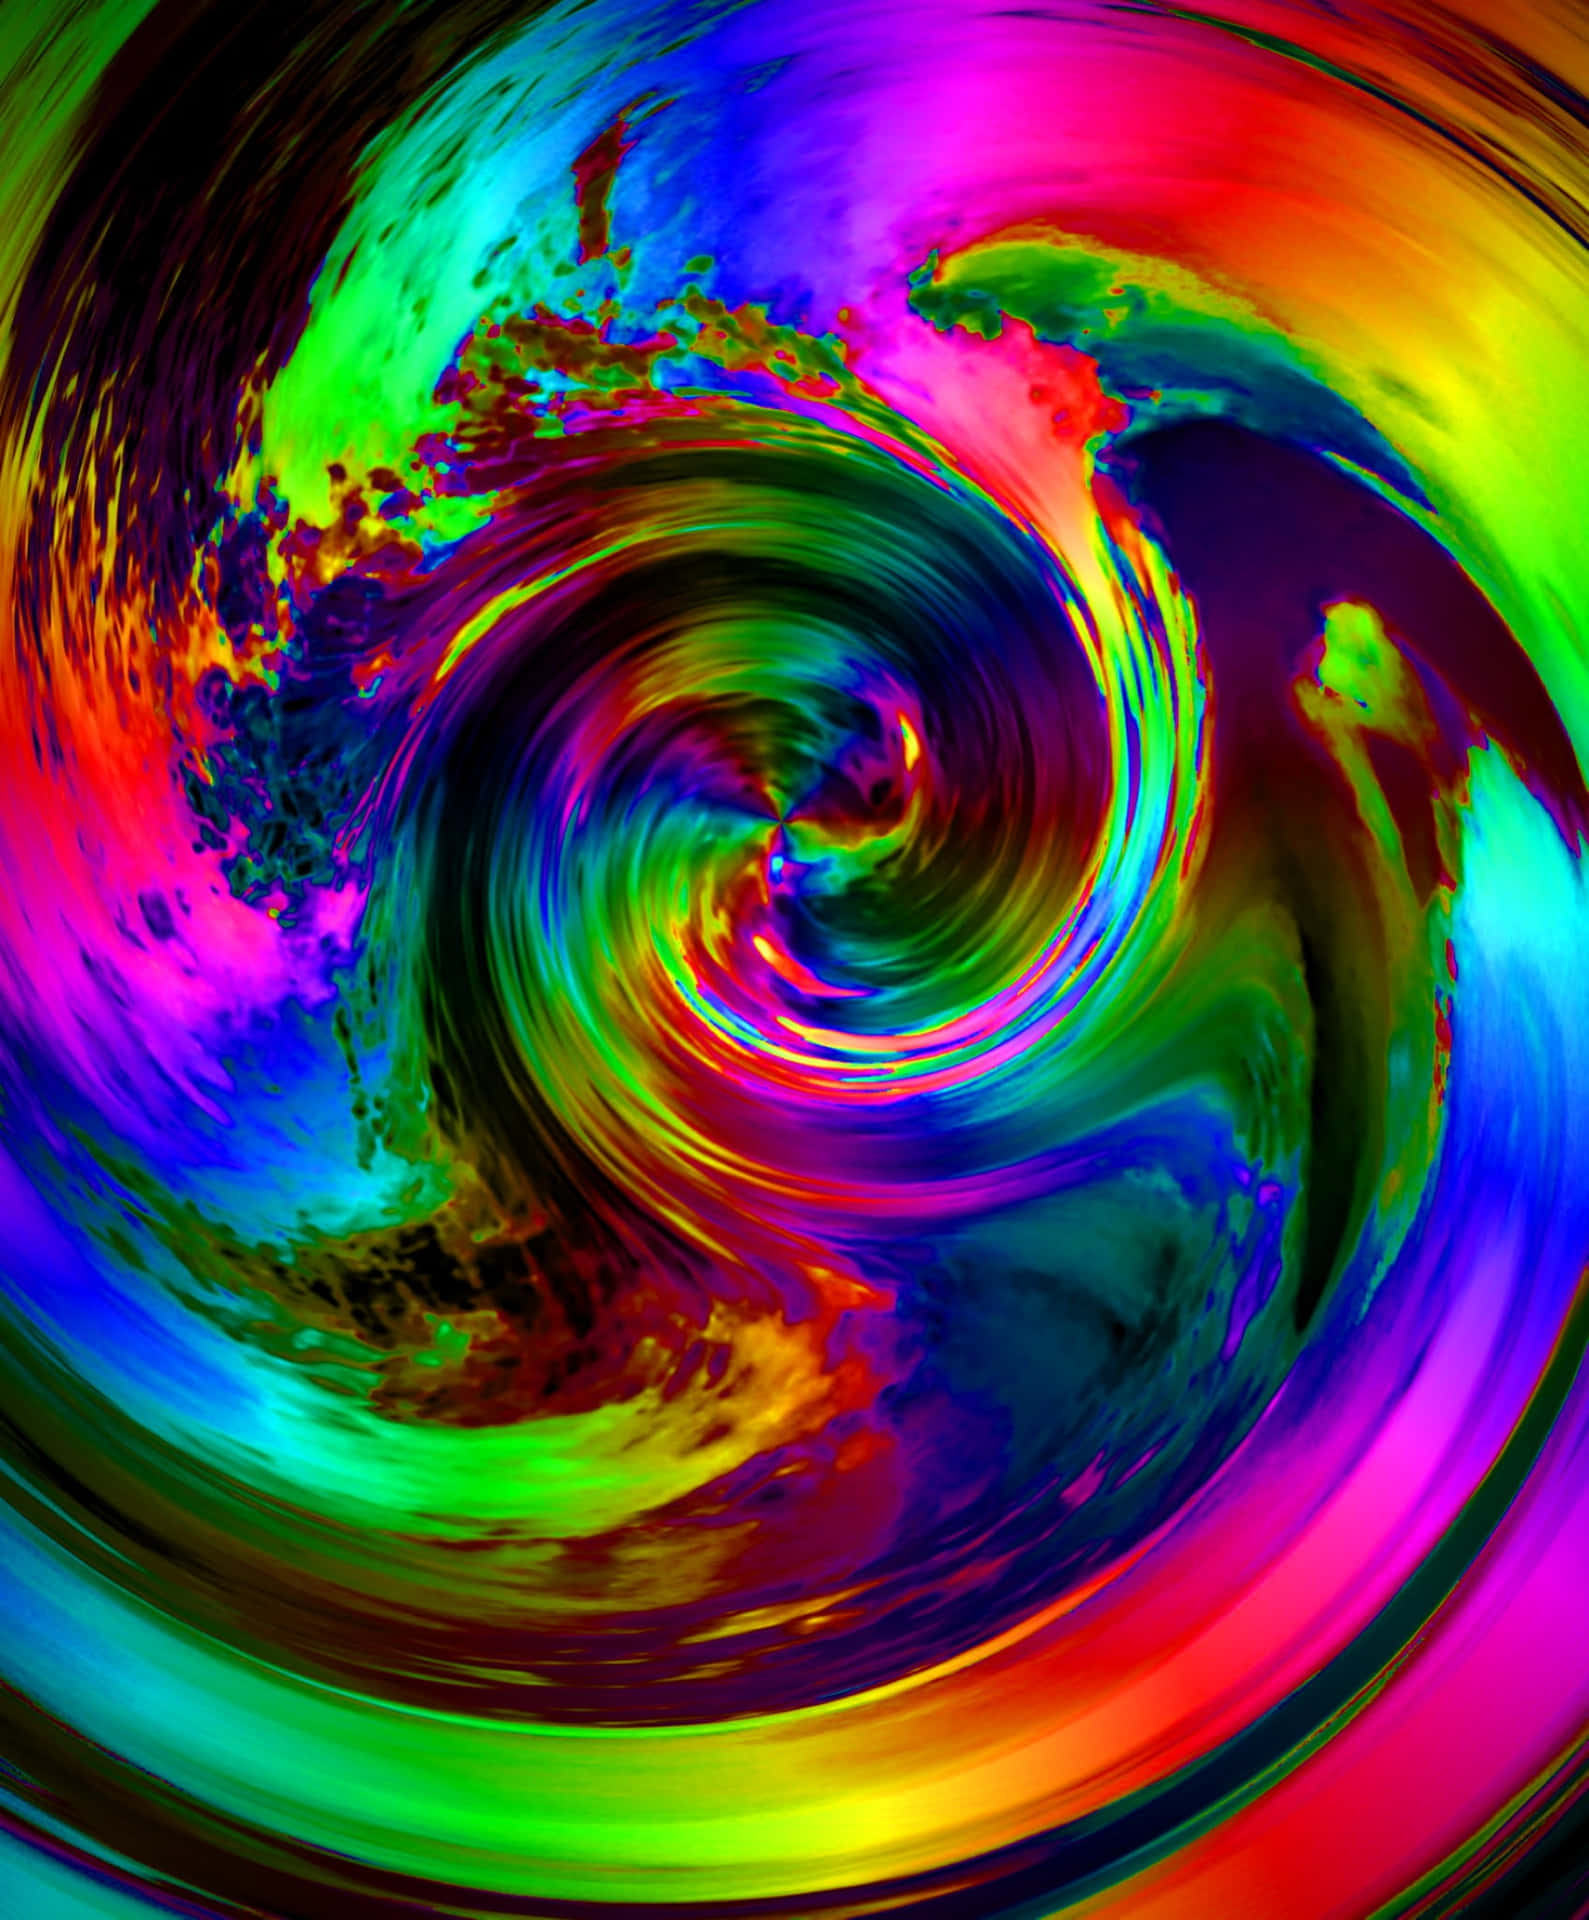 A Colorful Swirling Spiral